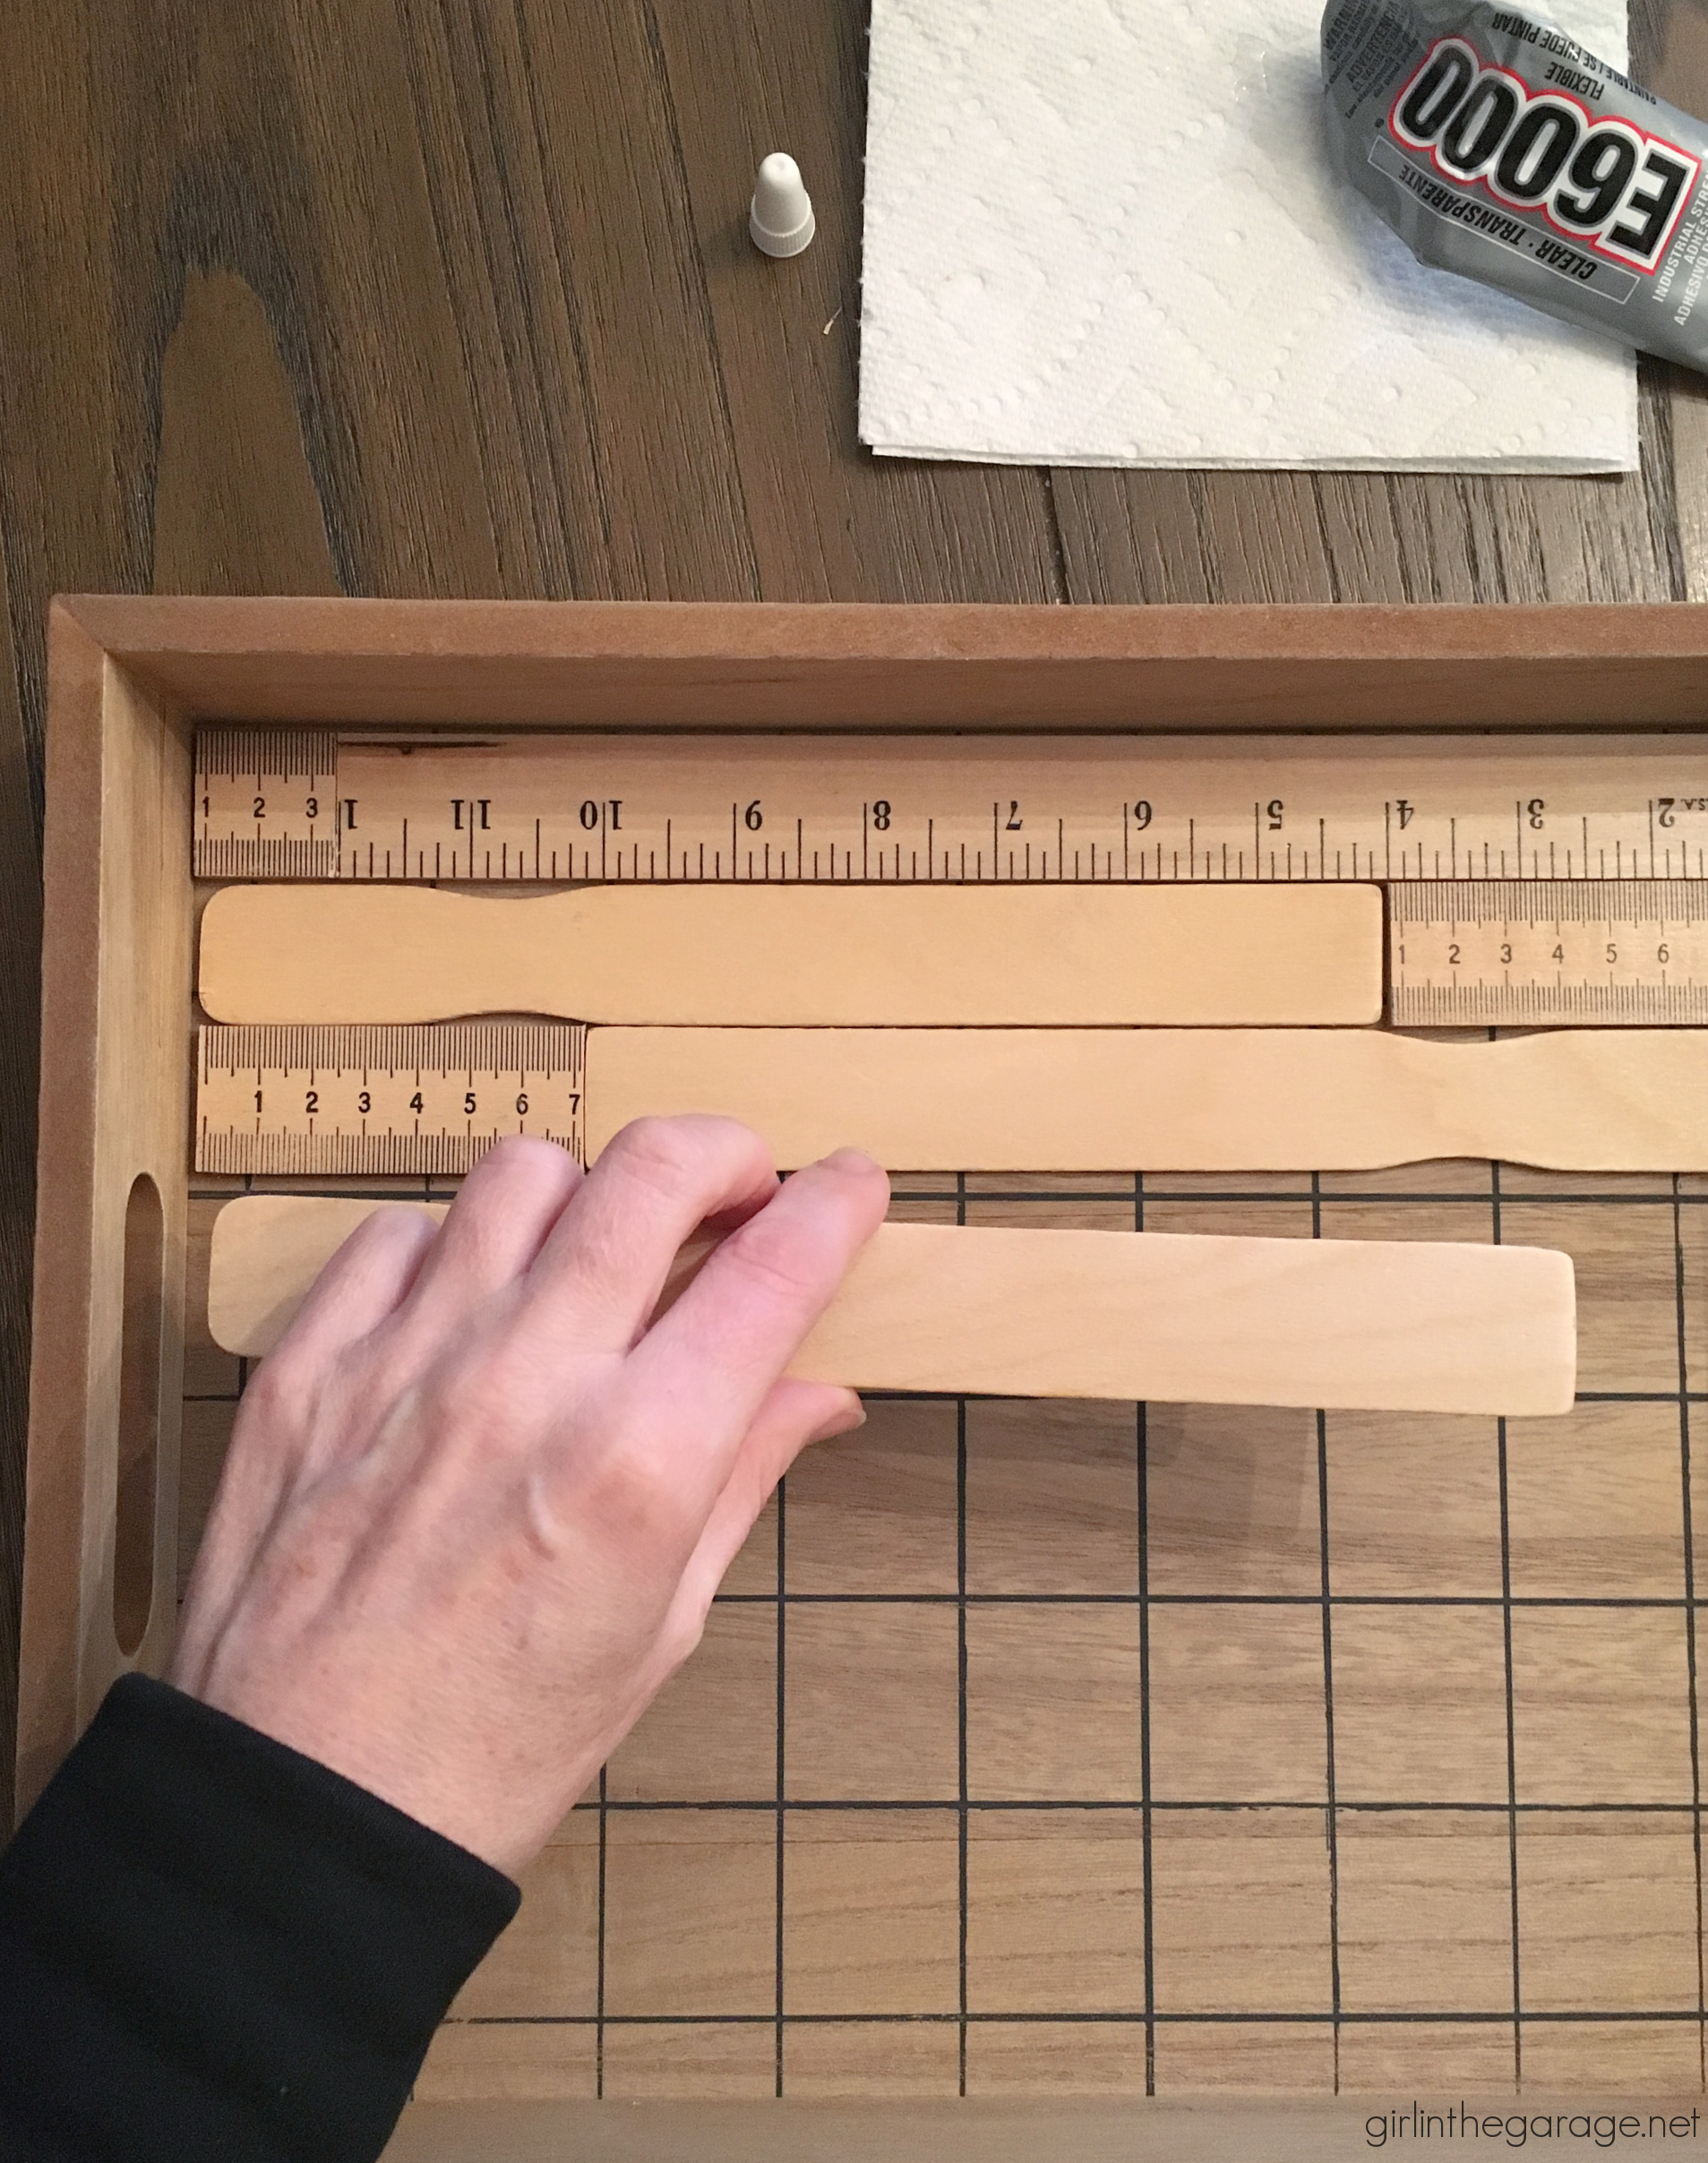 How to make an adorable upcycled wood tray with yardsticks and paint stirrers. Easy DIY home decor idea by Girl in the Garage